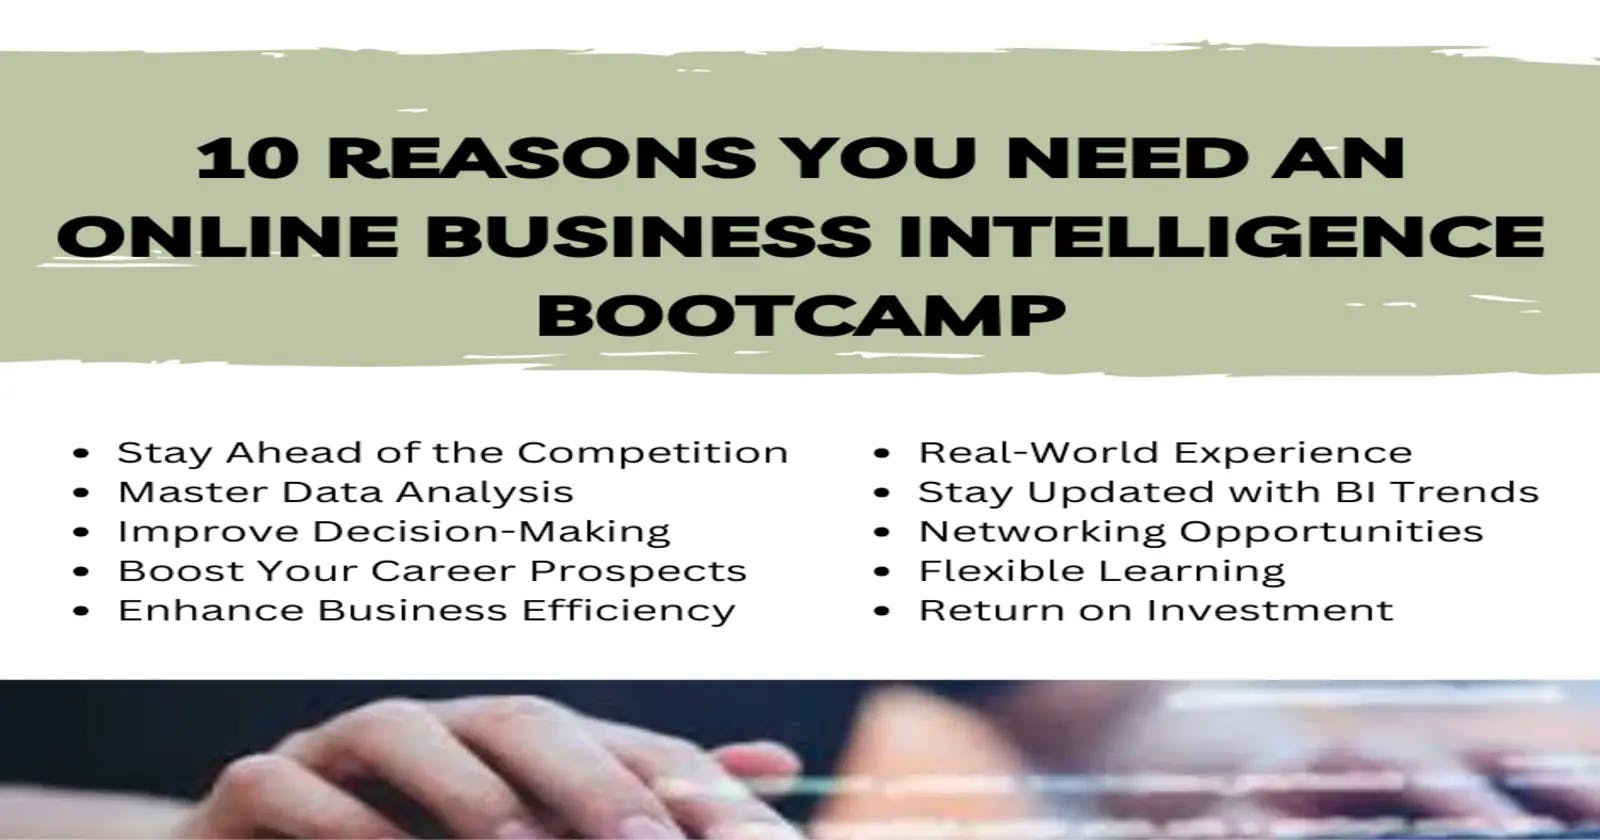 10 Reasons You Need an Online Business Intelligence Bootcamp